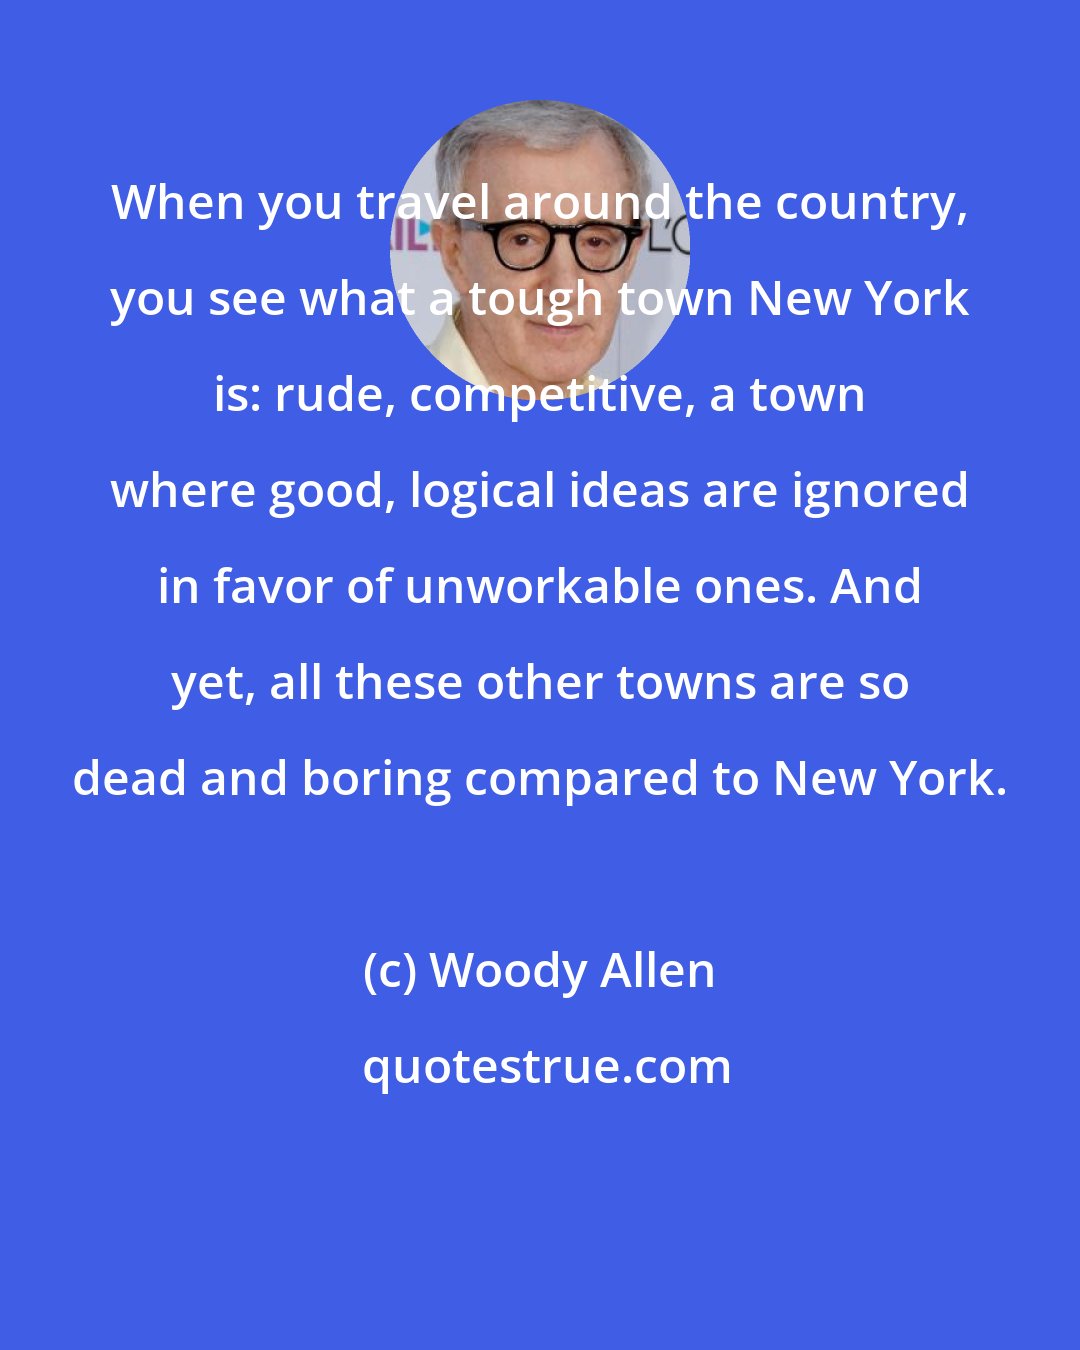 Woody Allen: When you travel around the country, you see what a tough town New York is: rude, competitive, a town where good, logical ideas are ignored in favor of unworkable ones. And yet, all these other towns are so dead and boring compared to New York.